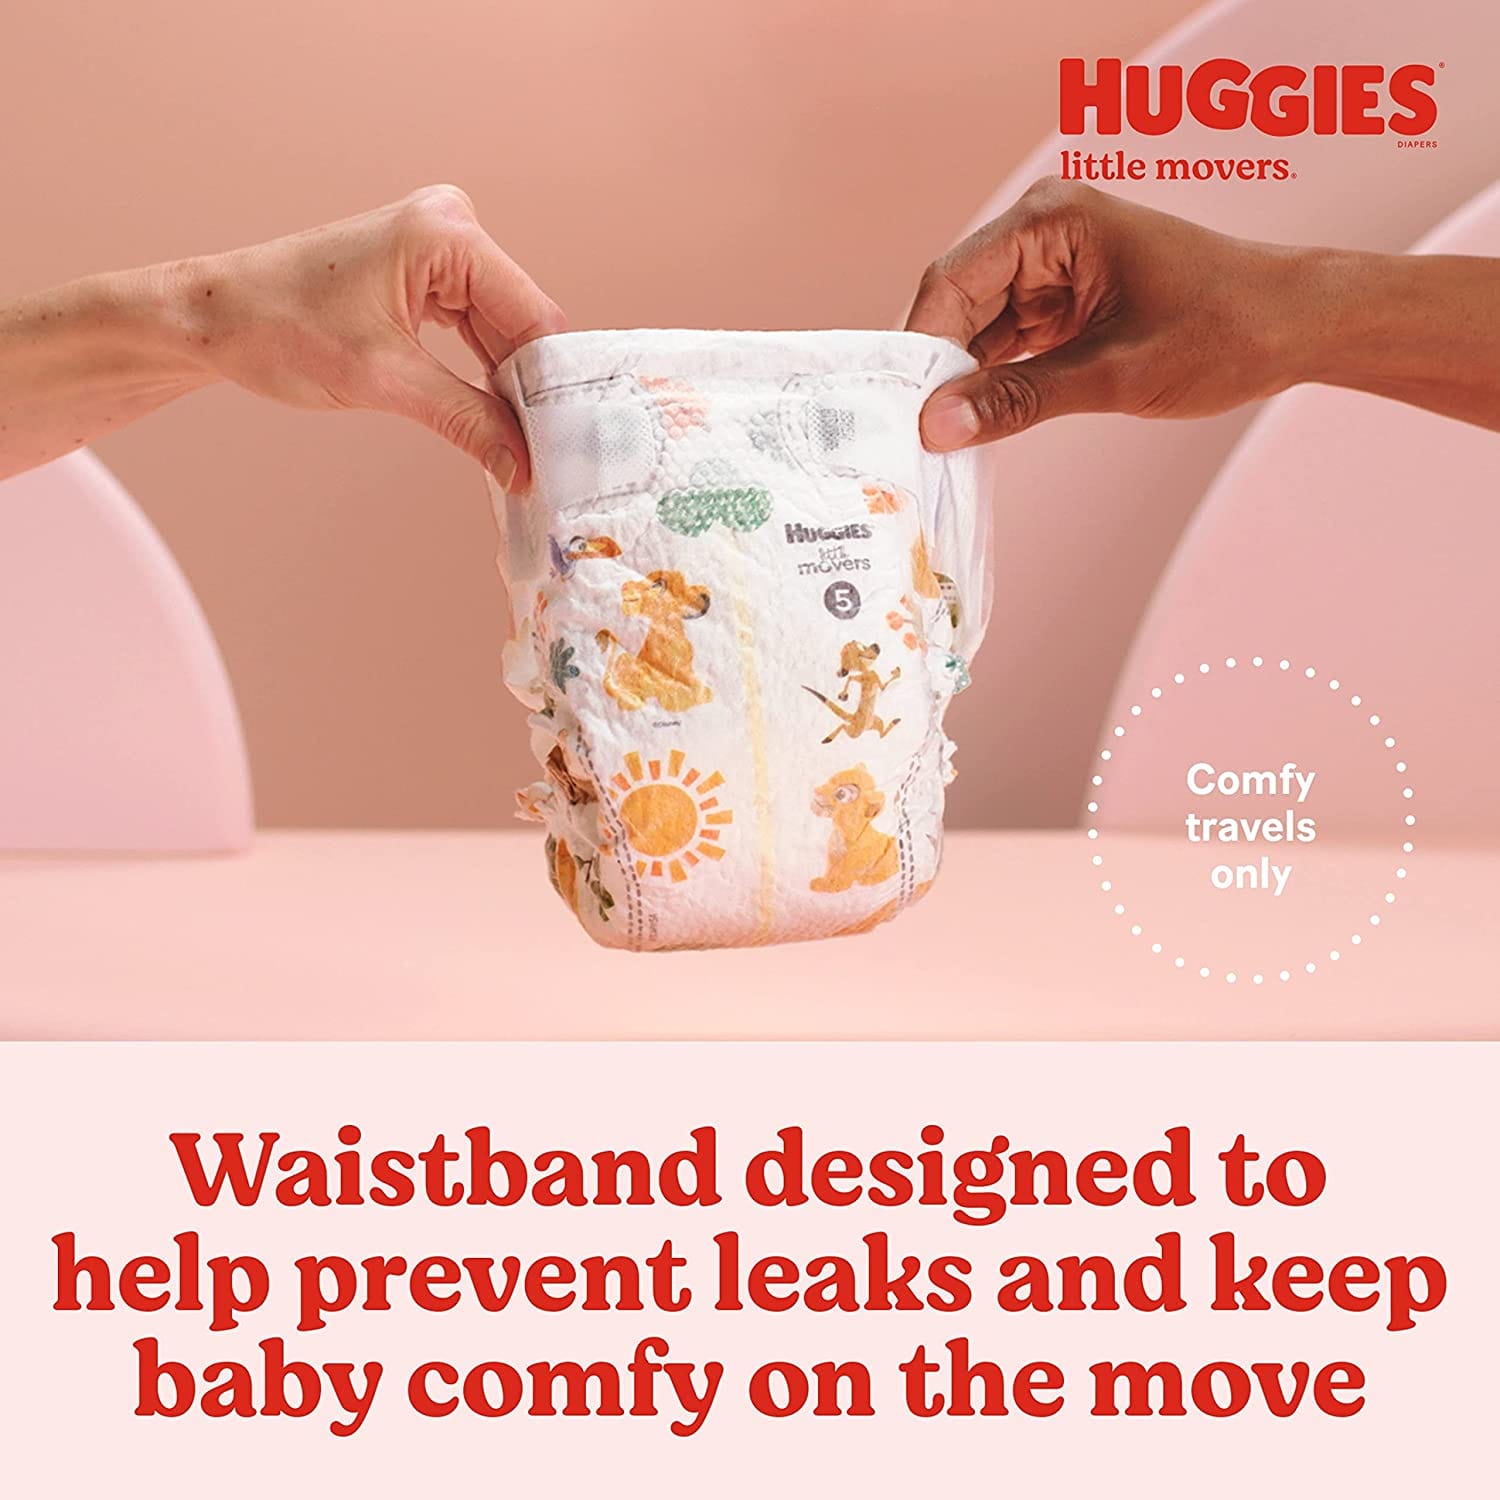 Did Huggies Airbrush a Baby Thigh Gap Into One of Their Ads?